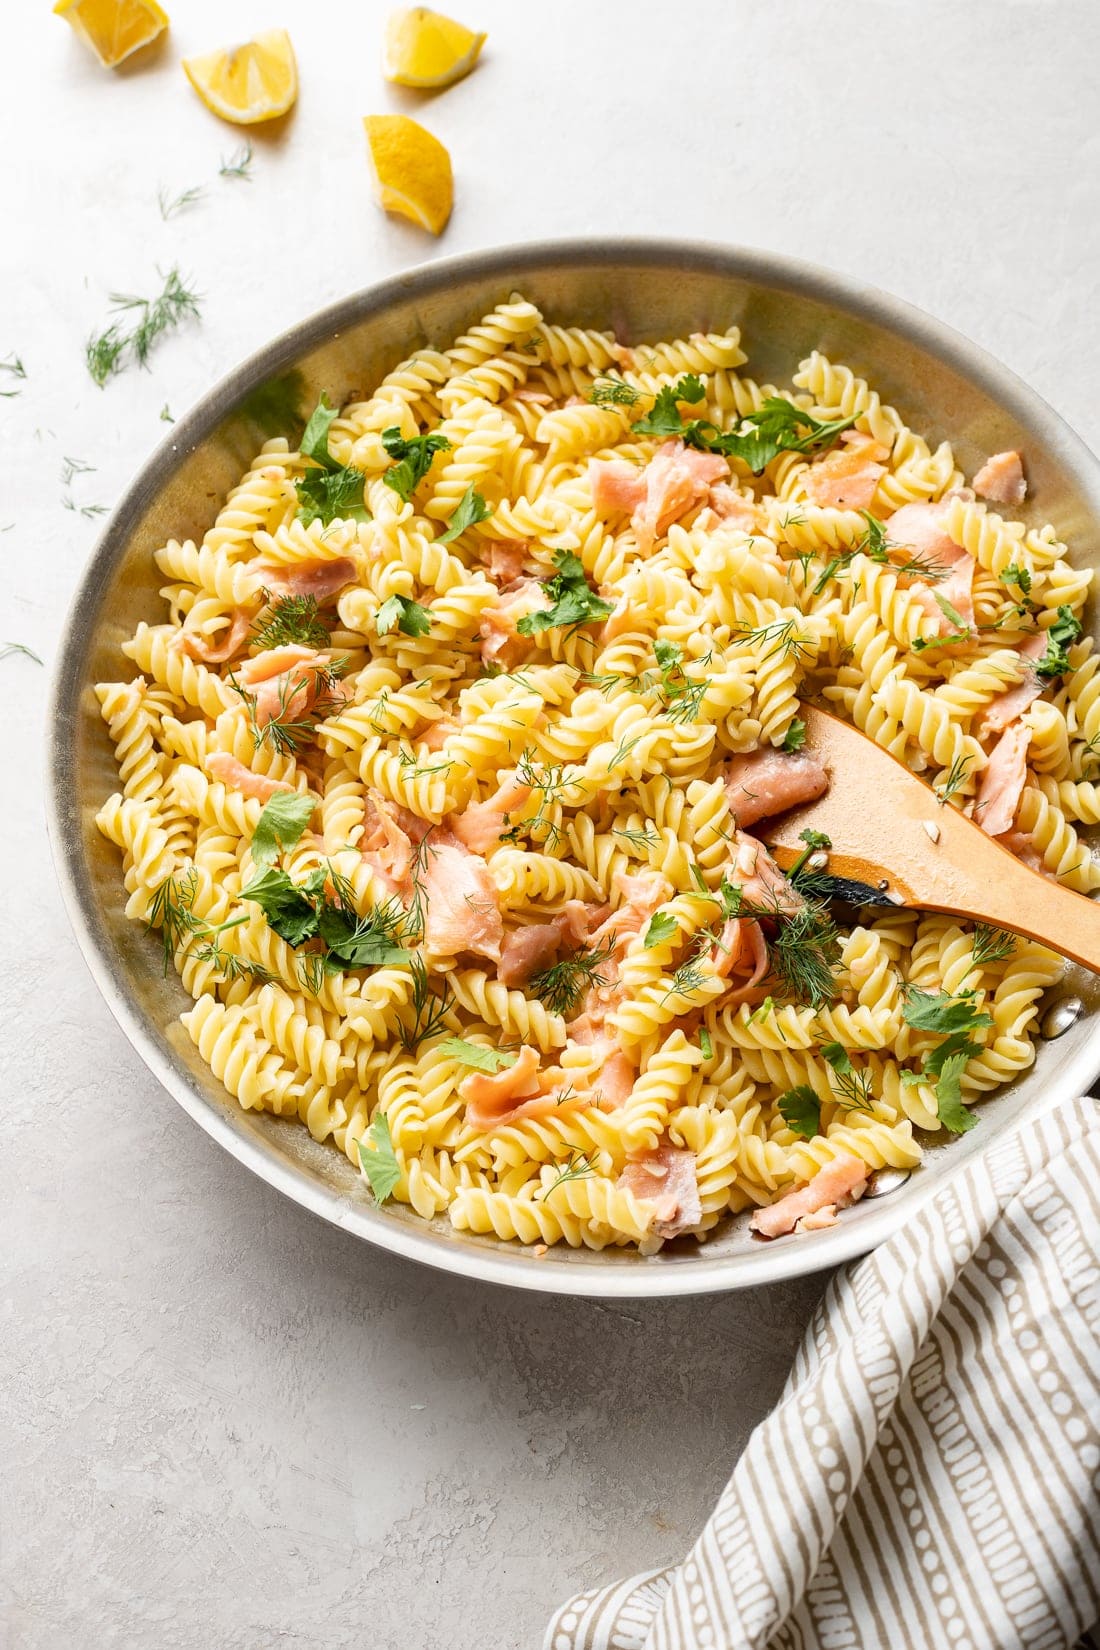 Large skillet filled with Creamy Smoked Salmon Pasta.